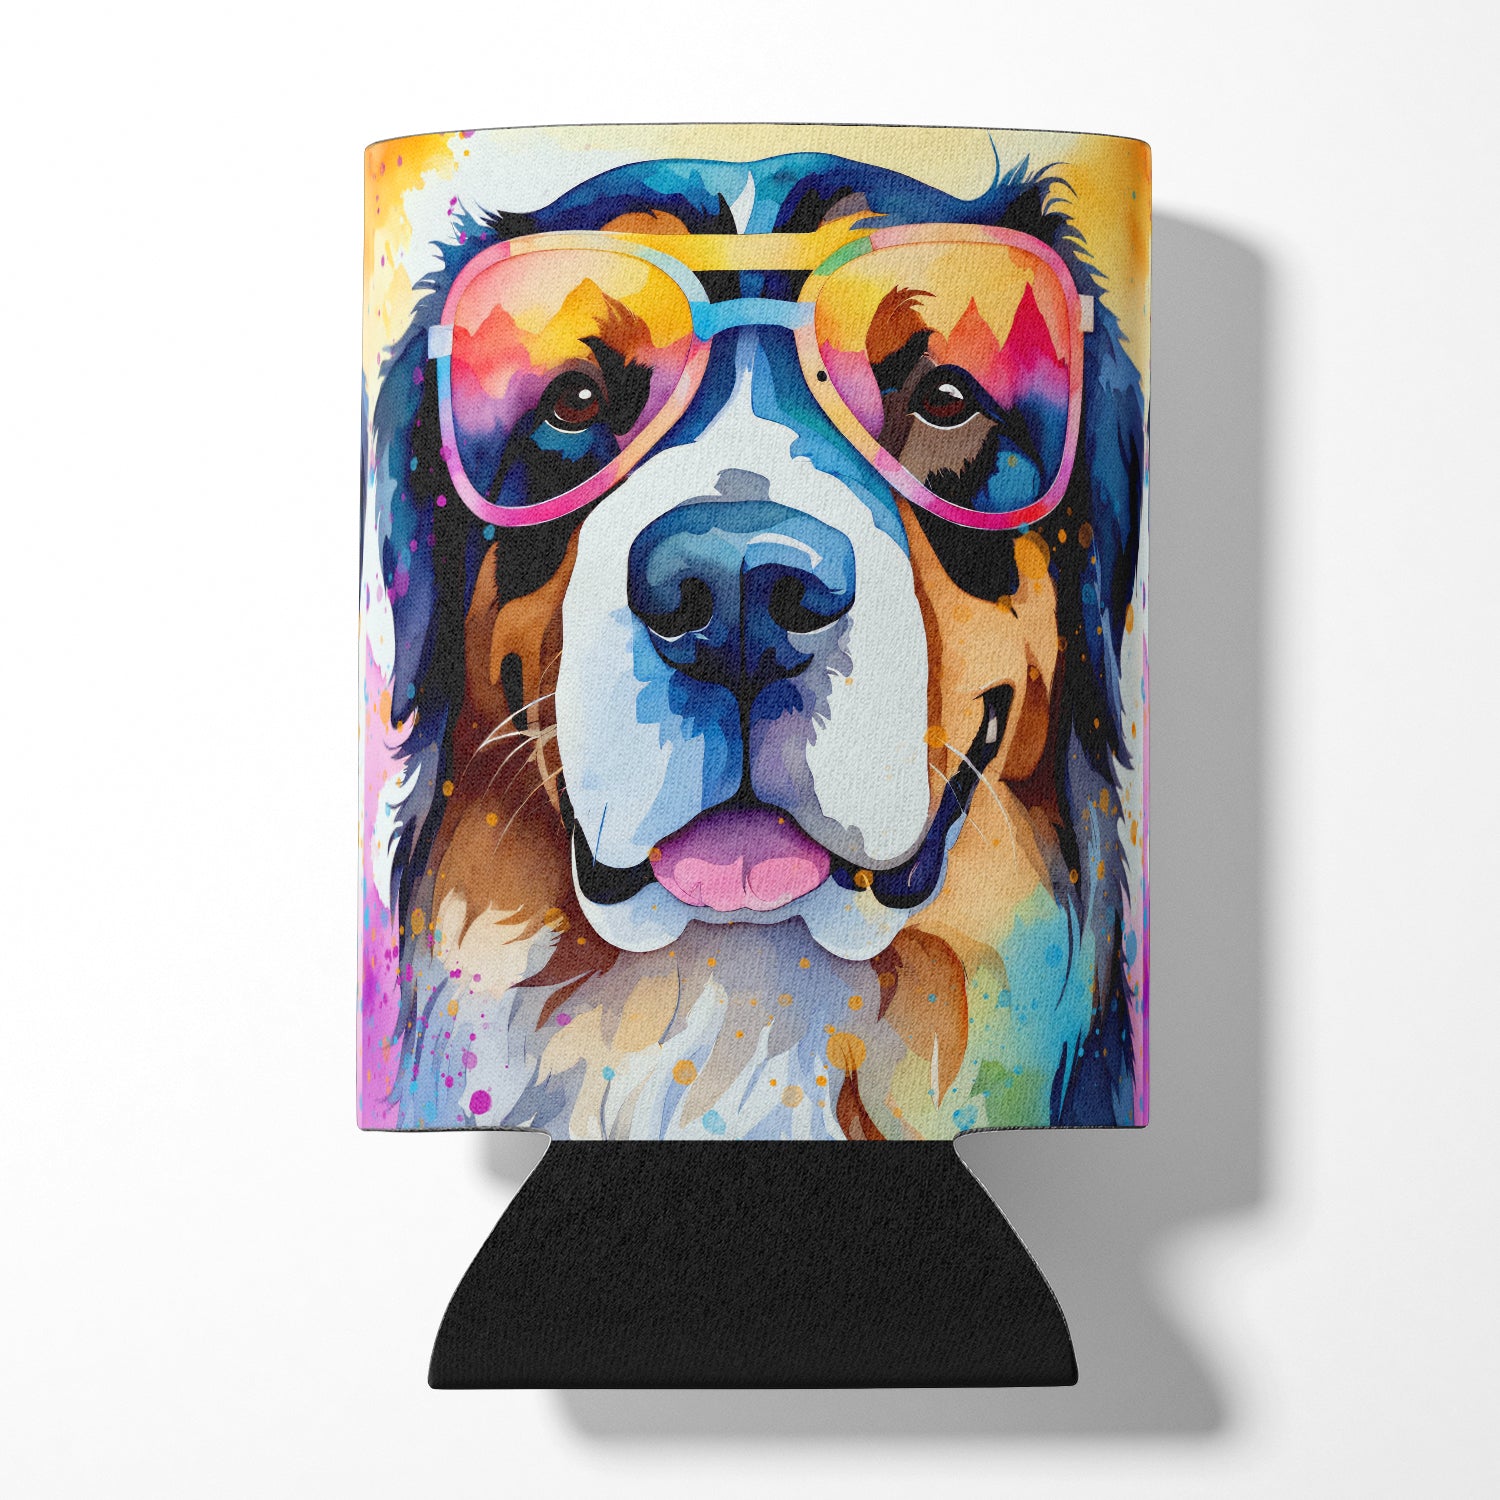 Buy this Bernese Mountain Dog Hippie Dawg Can or Bottle Hugger